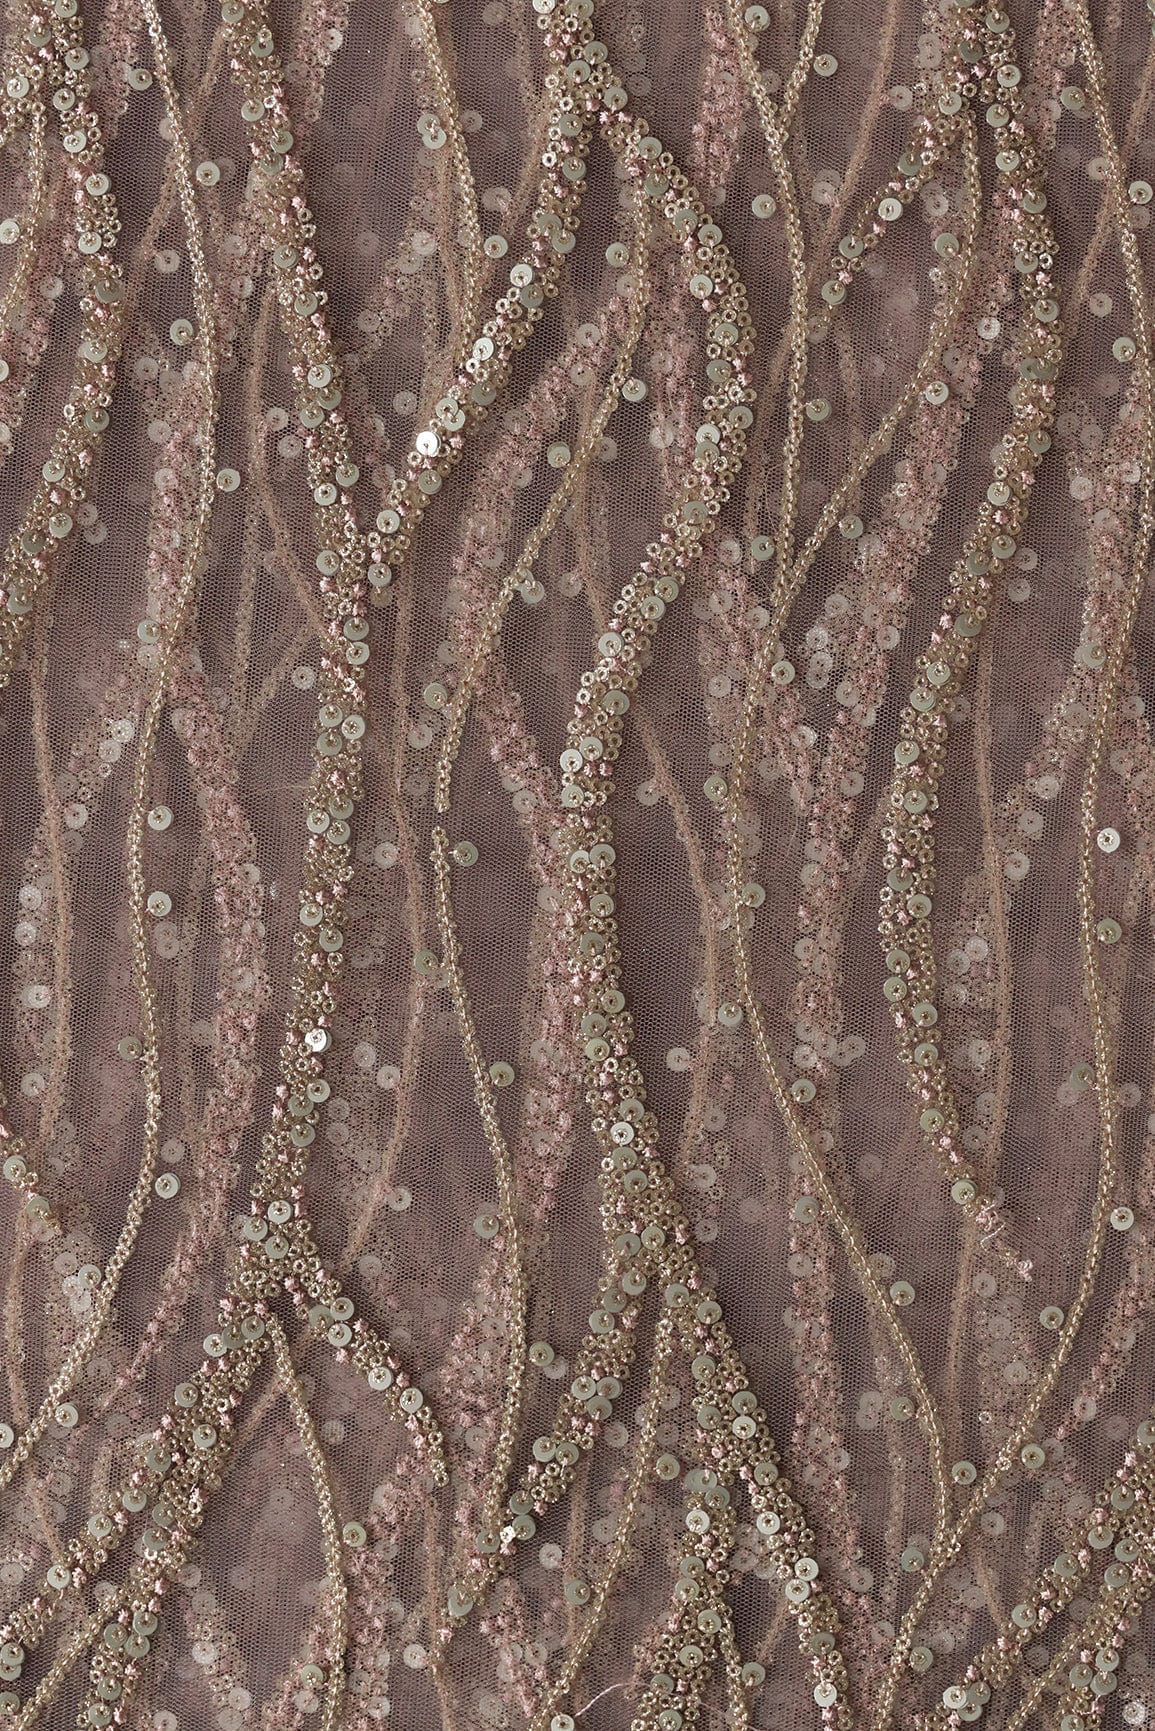 doeraa Embroidery Fabrics Gold And Silver Sequins With Mauve Thread Wavy Embroidery Work On Mauve Soft Net Fabric